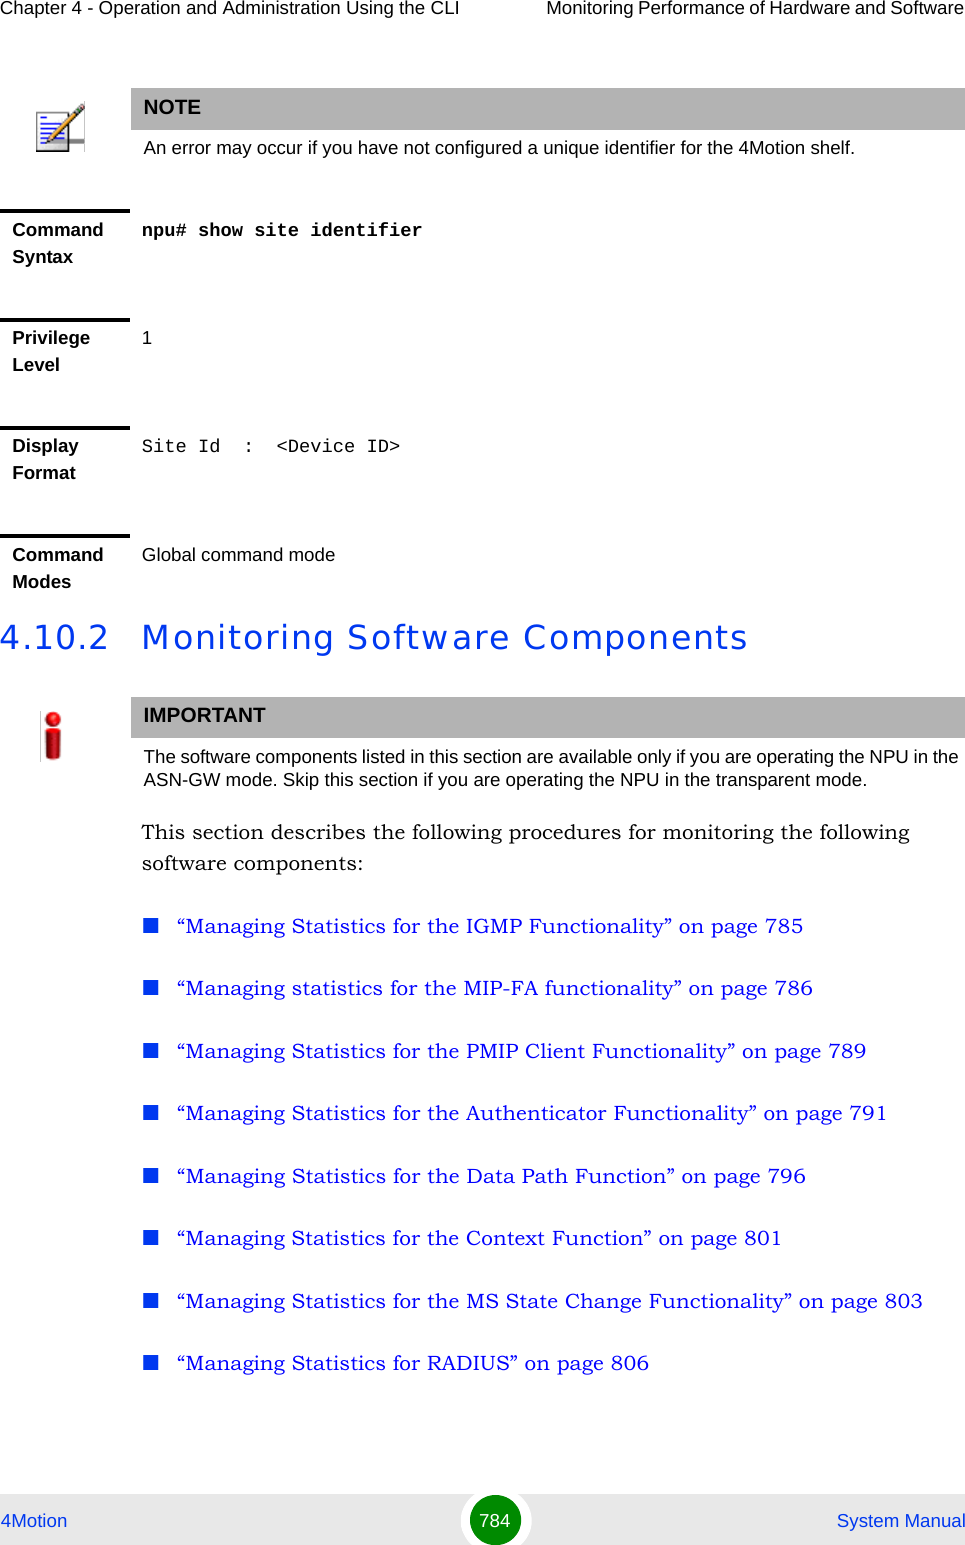 Chapter 4 - Operation and Administration Using the CLI Monitoring Performance of Hardware and Software 4Motion 784  System Manual4.10.2 Monitoring Software ComponentsThis section describes the following procedures for monitoring the following software components:“Managing Statistics for the IGMP Functionality” on page 785“Managing statistics for the MIP-FA functionality” on page 786“Managing Statistics for the PMIP Client Functionality” on page 789“Managing Statistics for the Authenticator Functionality” on page 791“Managing Statistics for the Data Path Function” on page 796“Managing Statistics for the Context Function” on page 801“Managing Statistics for the MS State Change Functionality” on page 803“Managing Statistics for RADIUS” on page 806NOTEAn error may occur if you have not configured a unique identifier for the 4Motion shelf.Command Syntaxnpu# show site identifierPrivilege Level1Display FormatSite Id  :  &lt;Device ID&gt;Command ModesGlobal command modeIMPORTANTThe software components listed in this section are available only if you are operating the NPU in the ASN-GW mode. Skip this section if you are operating the NPU in the transparent mode. 